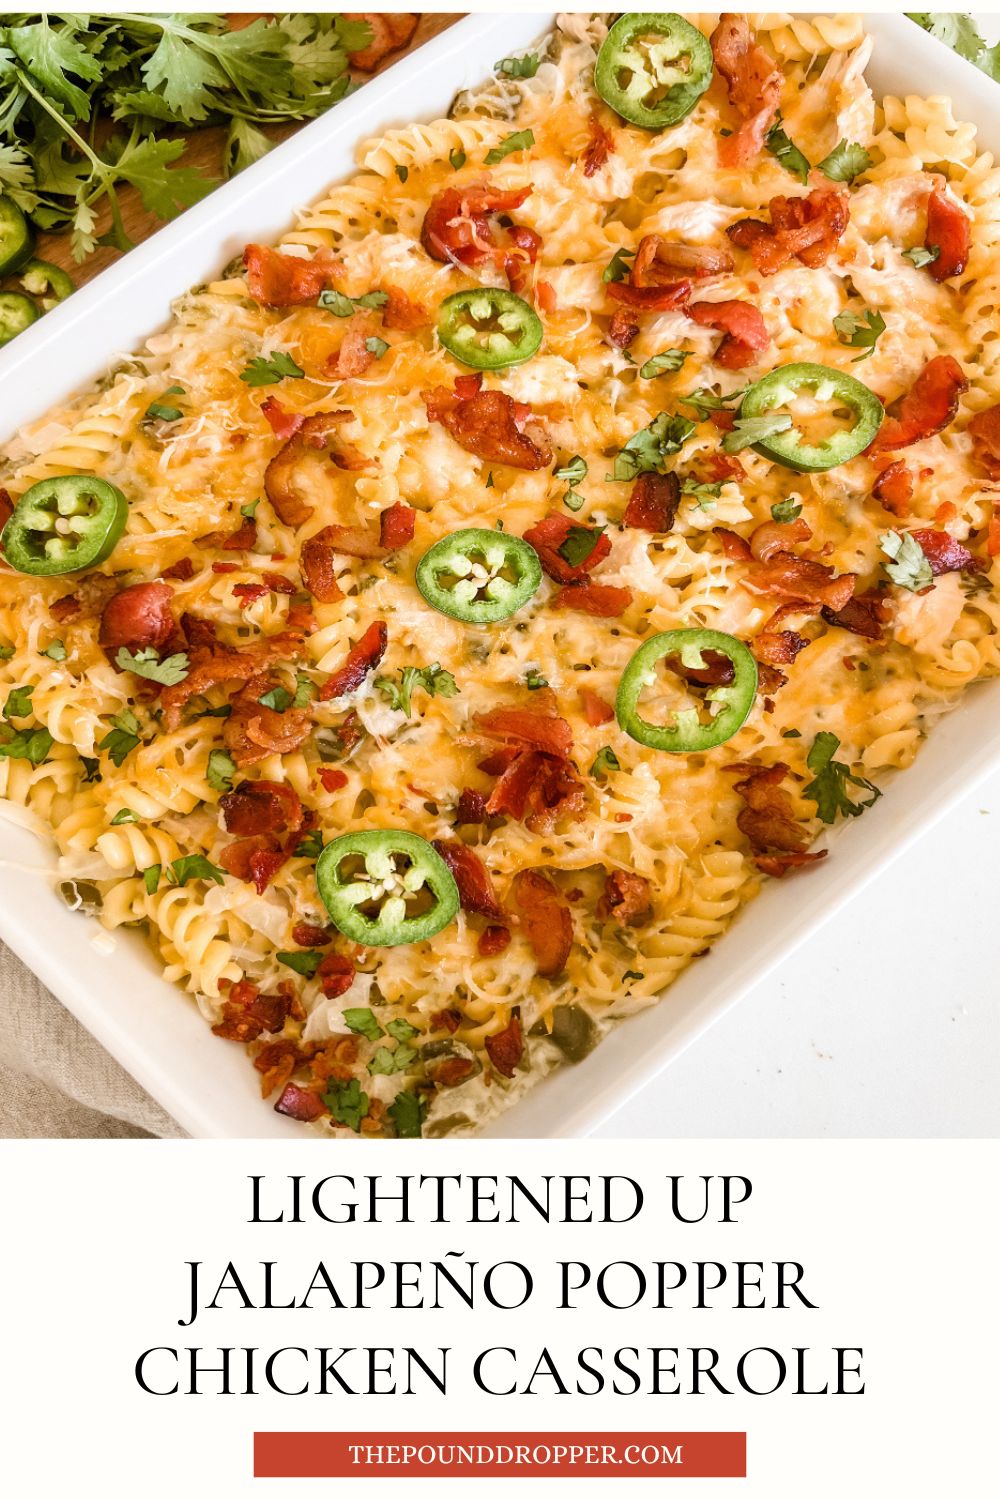 If you're a huge fan of Jalapeño poppers, then you will LOVE this Lightened Up Jalapeño Popper Chicken Casserole! This Lightened Up Jalapeño Popper Chicken Casserole has the perfect amount of heat from jalapeños, creamy cheese sauce, with chicken and pasta, and then topped with crispy bacon! via @pounddropper